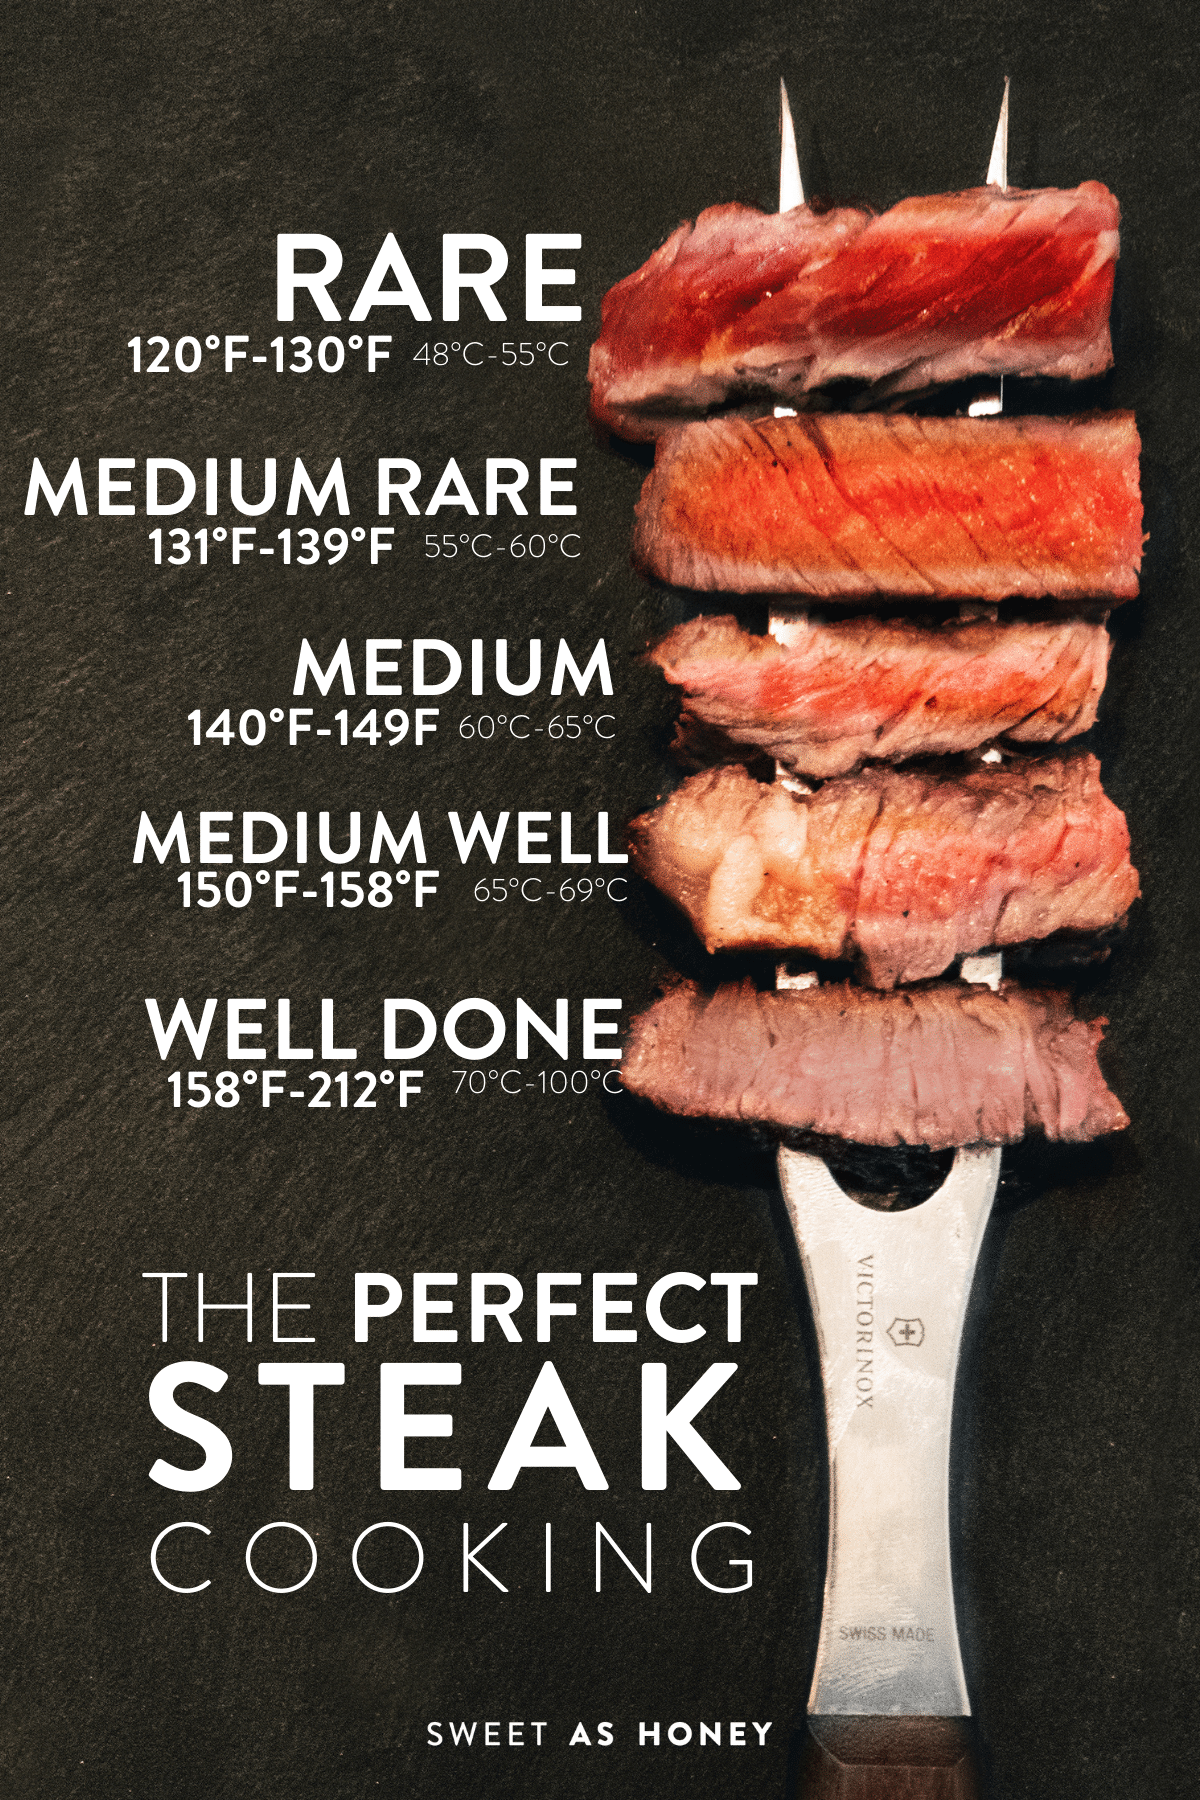 Steak Cooking Levels- How To Cook The As Honey